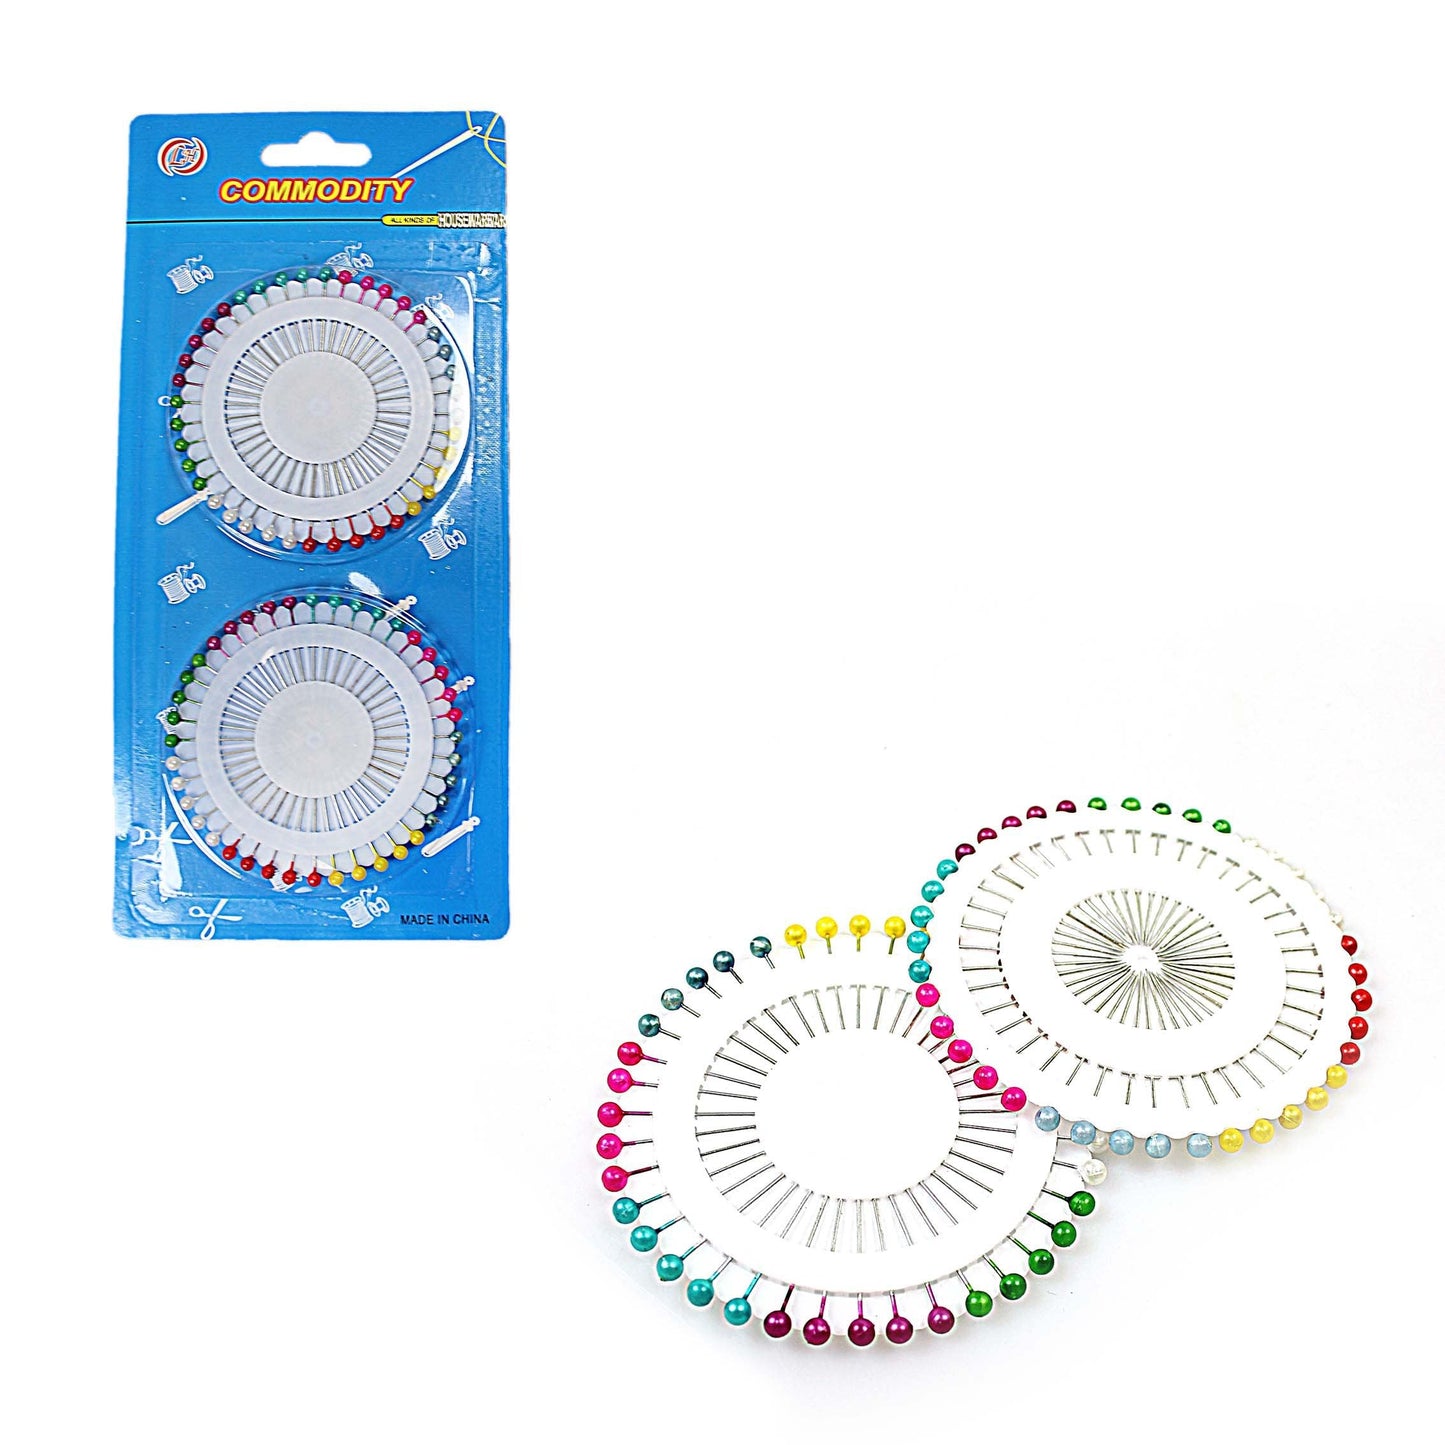 Dressmaker Sewing Needle Pin Wheels Pack of 2 0653 (Large Letter Rate)